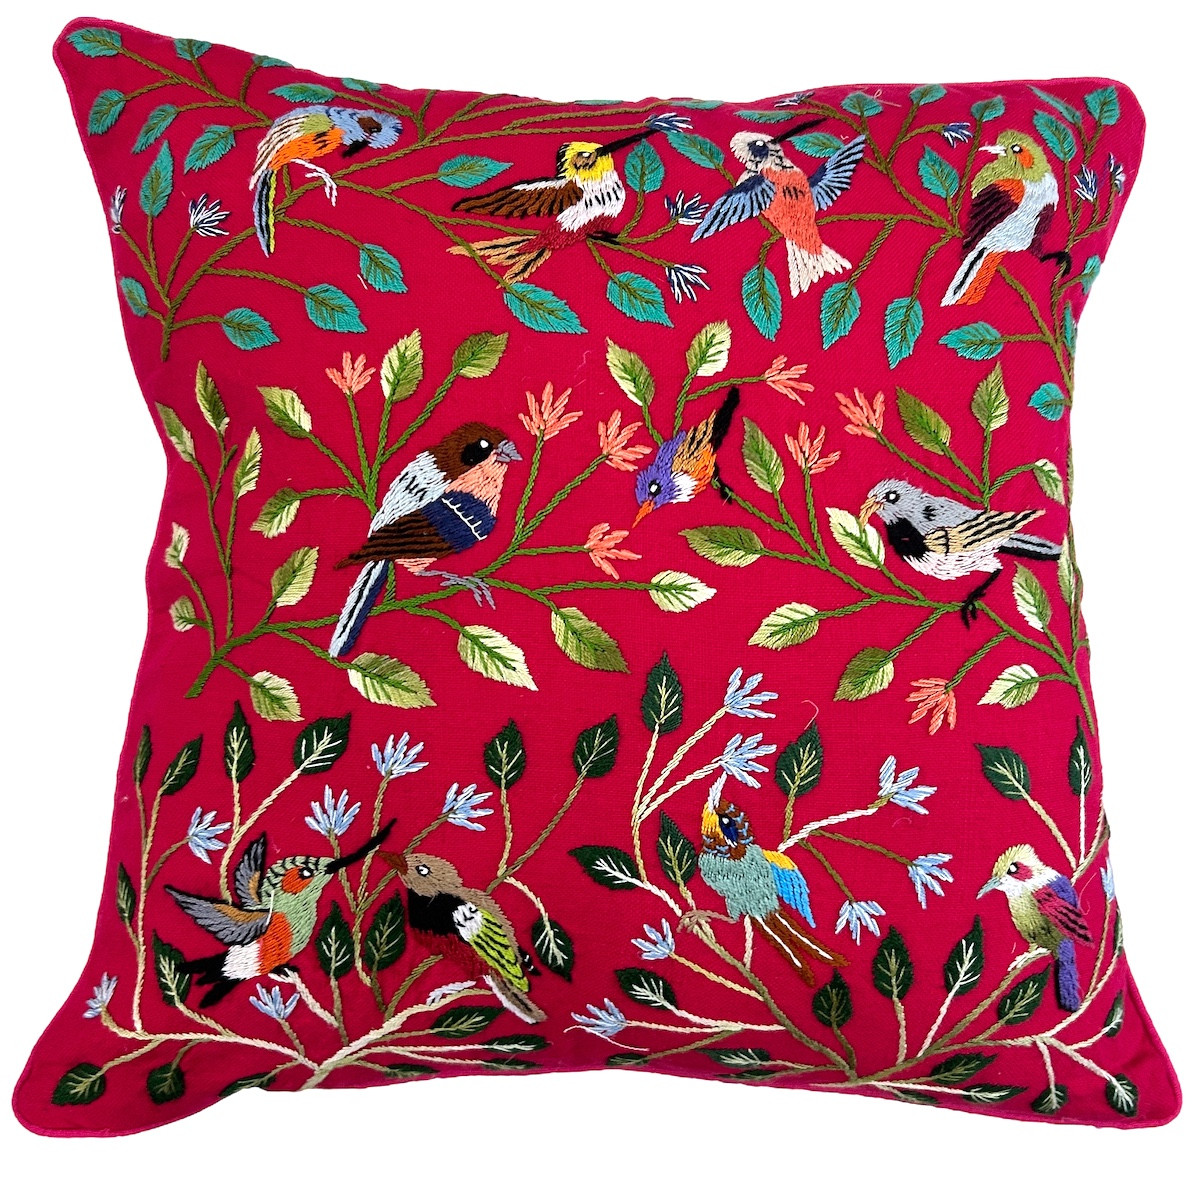 Handwoven and Hand Embroidered Bird Pillow on Rose  Guatemala (18" x 18") Handwoven cotton pillow with hand embroidery by one of the talented embroidery artists of Santiago Atitlan. The detailed embroidery is birds with branches and leaves in many colors on handwoven bright rose colored cotton cloth.  Each bird is unique-so allow for some variations. The back is the same fabric as the front of the pillow. Colors of embroidery- greens, blues, grey, brown, yellow, orange, peach, cream, black and more